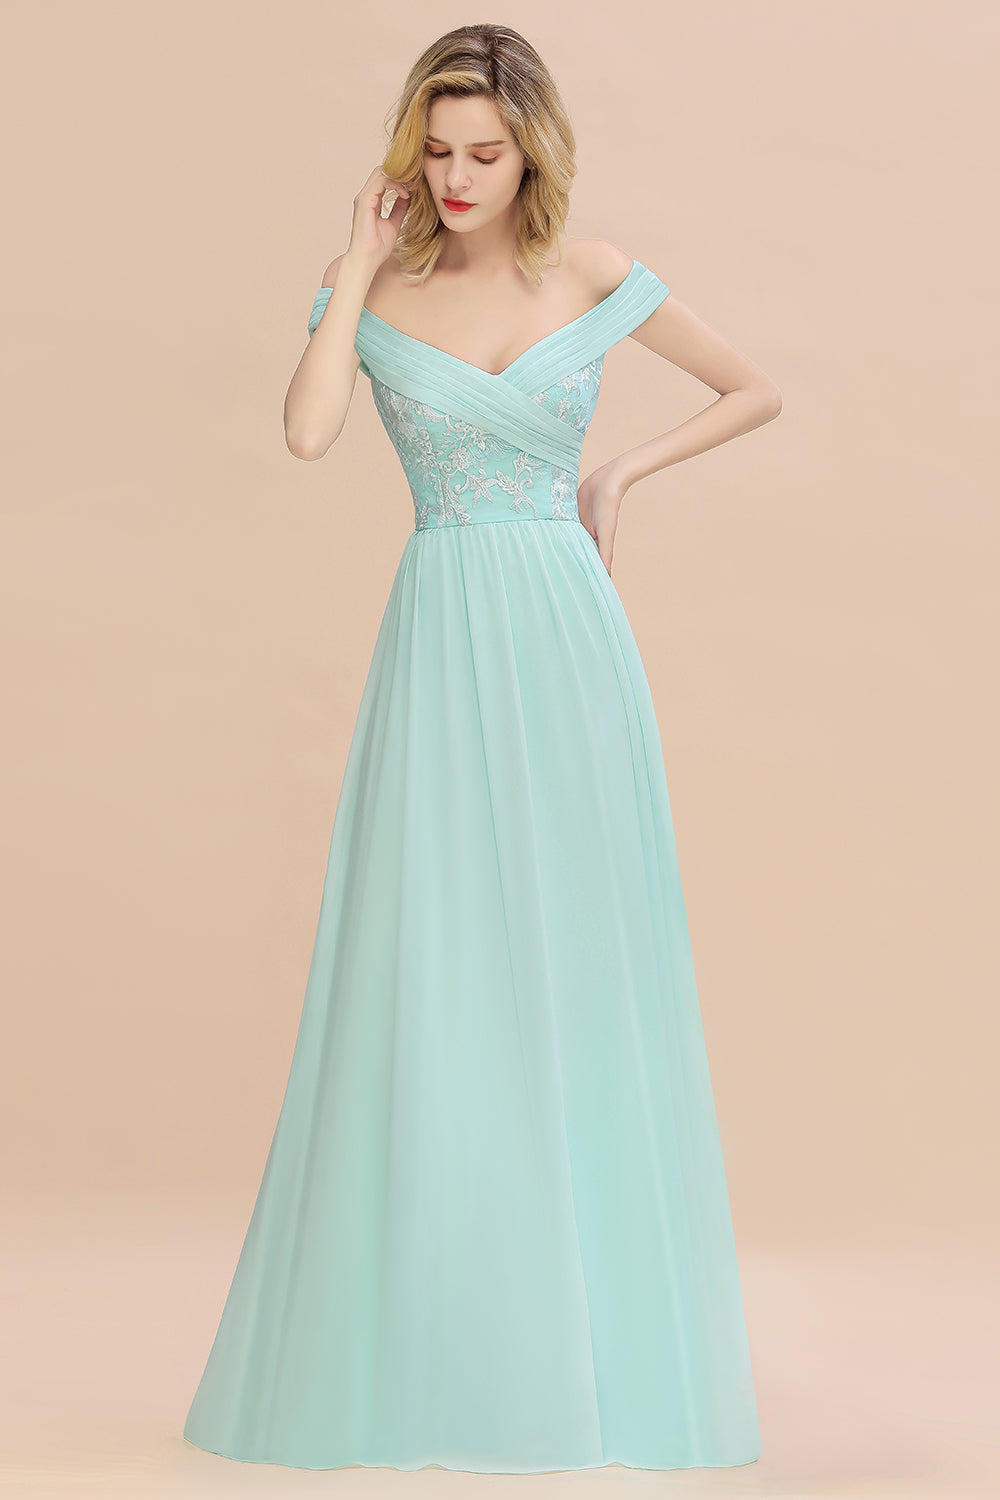 Load image into Gallery viewer, Simple Off-the-shoulder Long Affordable Bridesmaid Dress With Appliques-27dress
